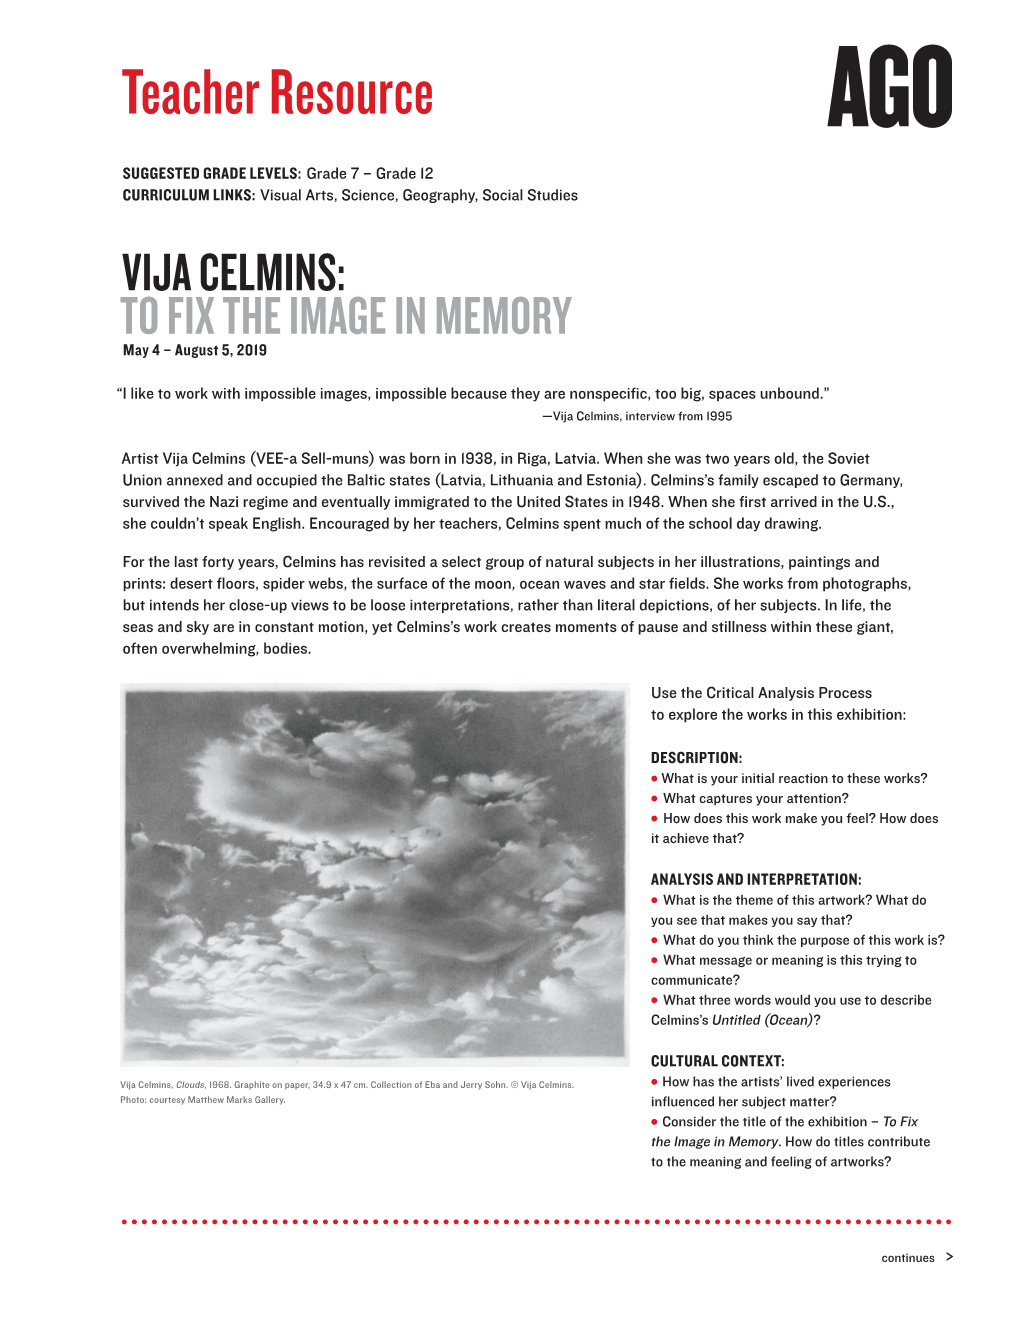 VIJA CELMINS: to FIX the IMAGE in MEMORY May 4 – August 5, 2019